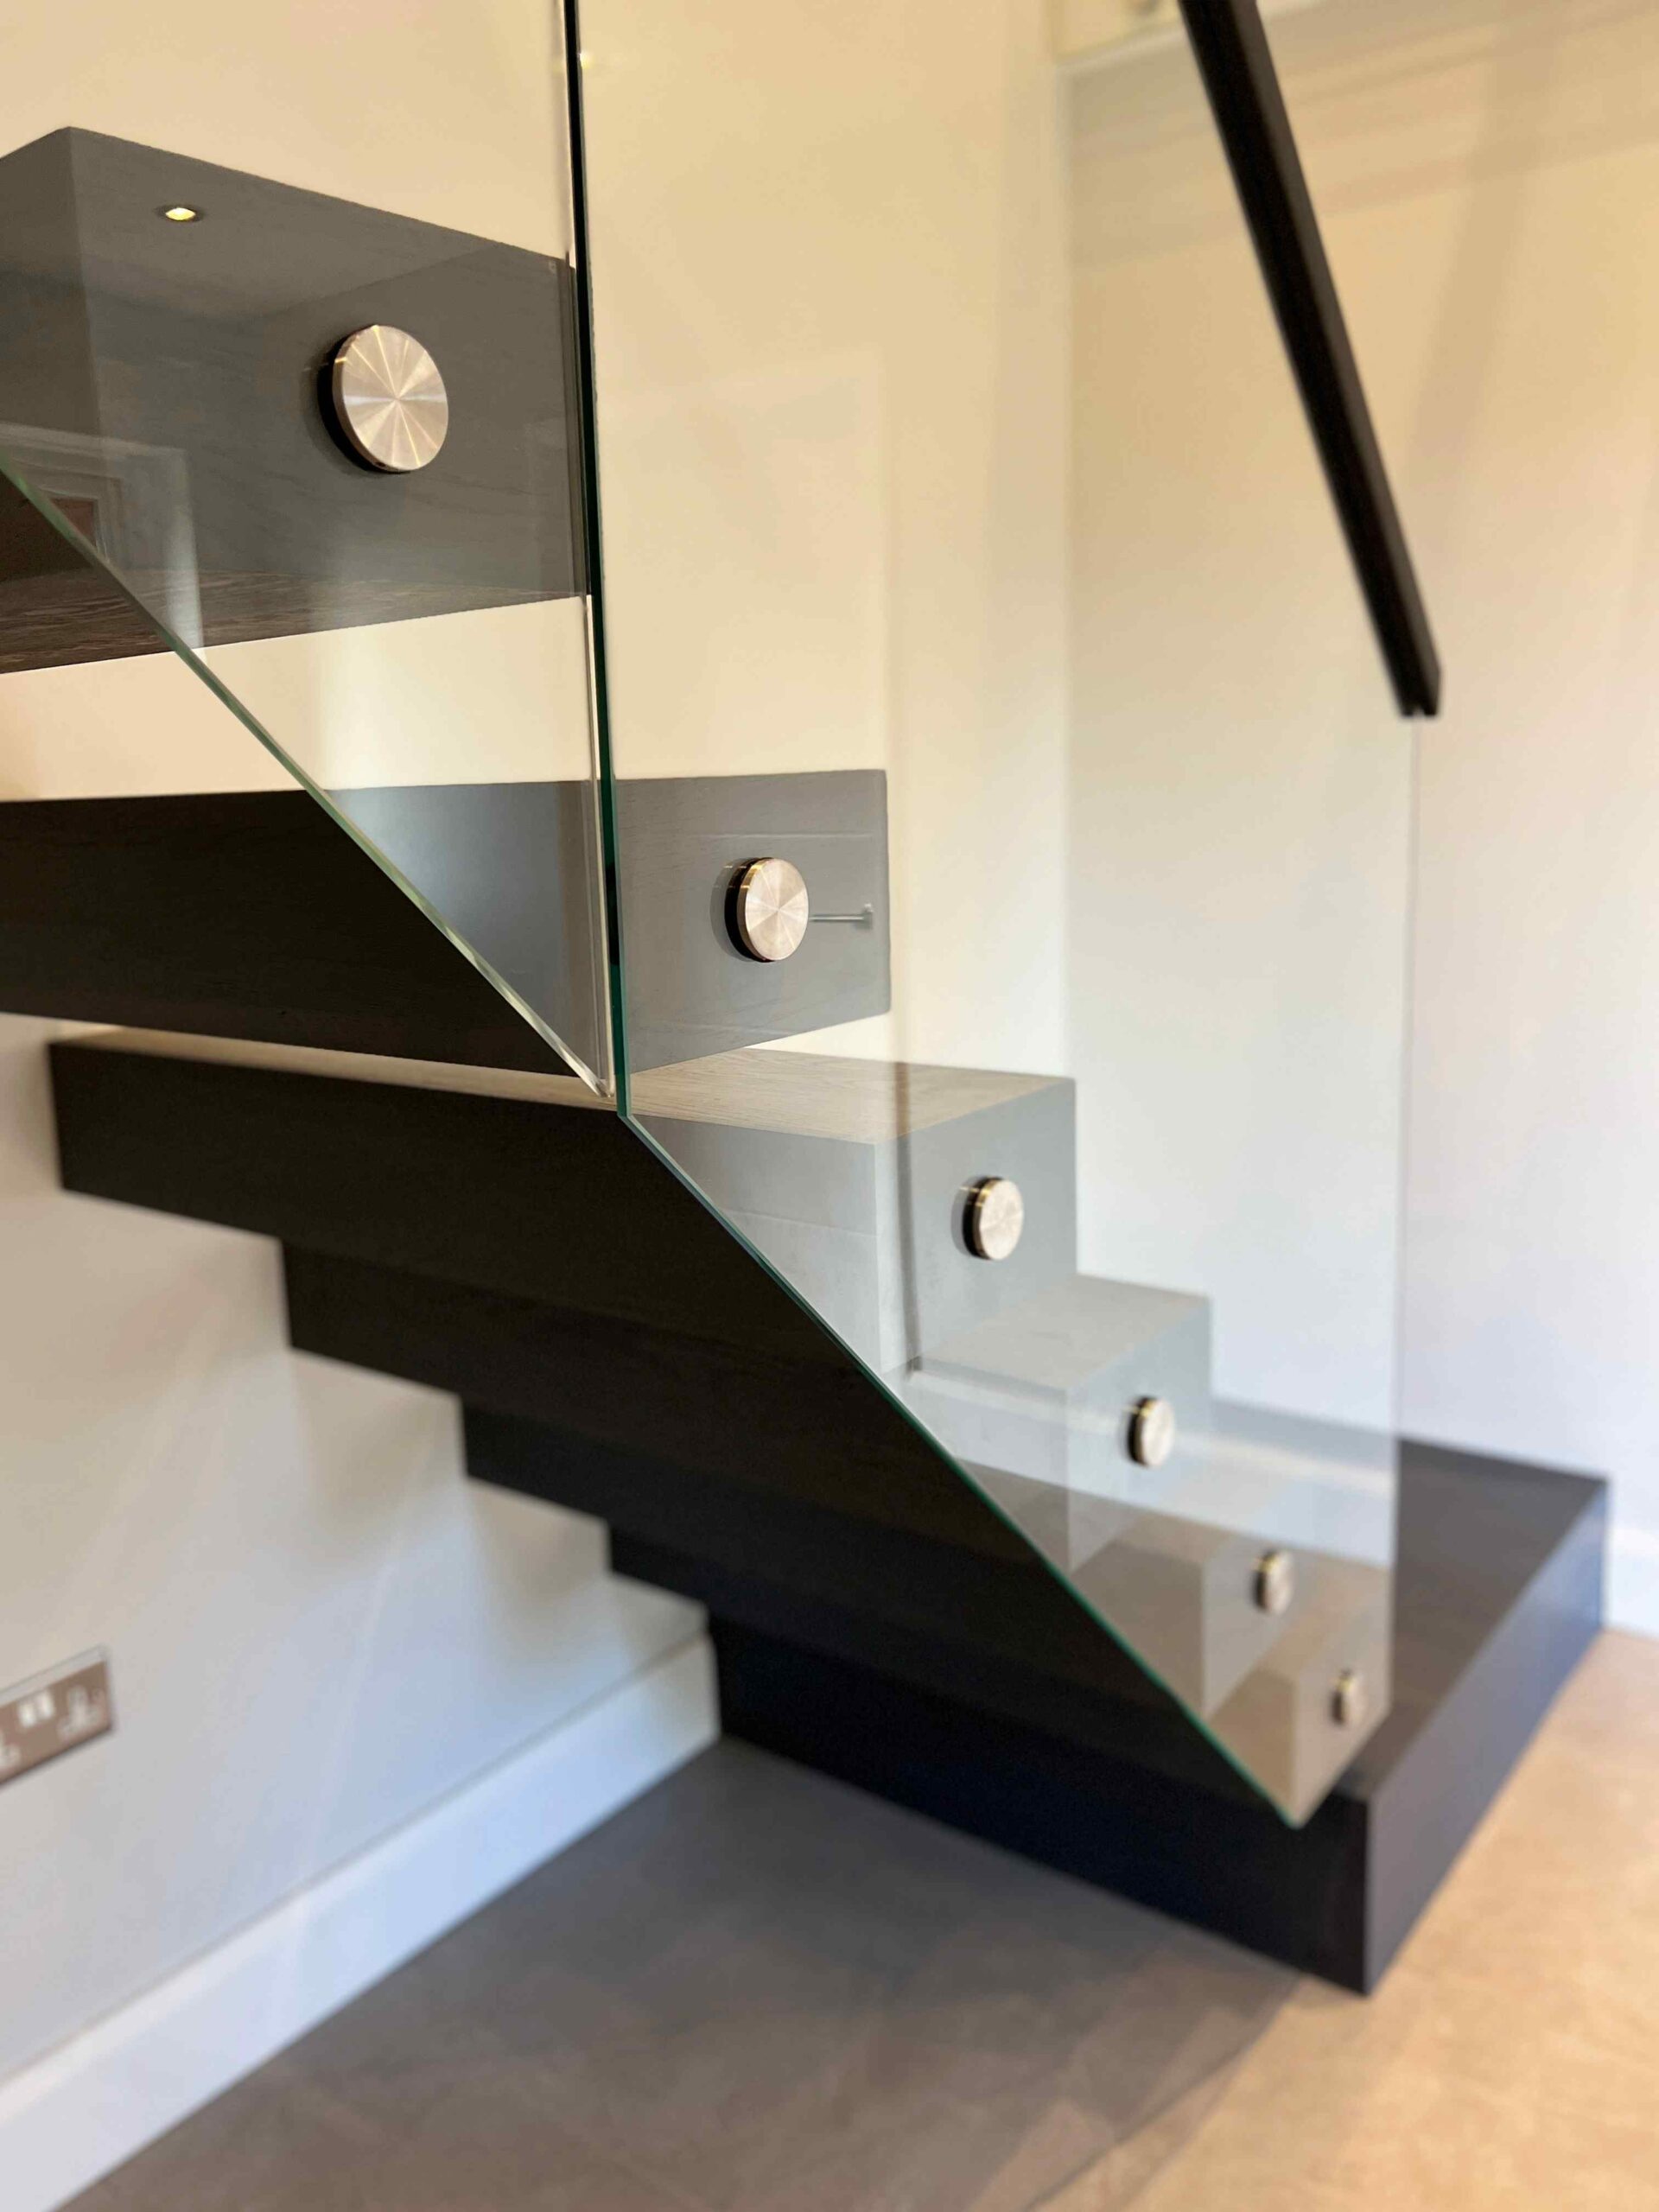  Floating staircase complemented with glass balustrade and black oak stair treads